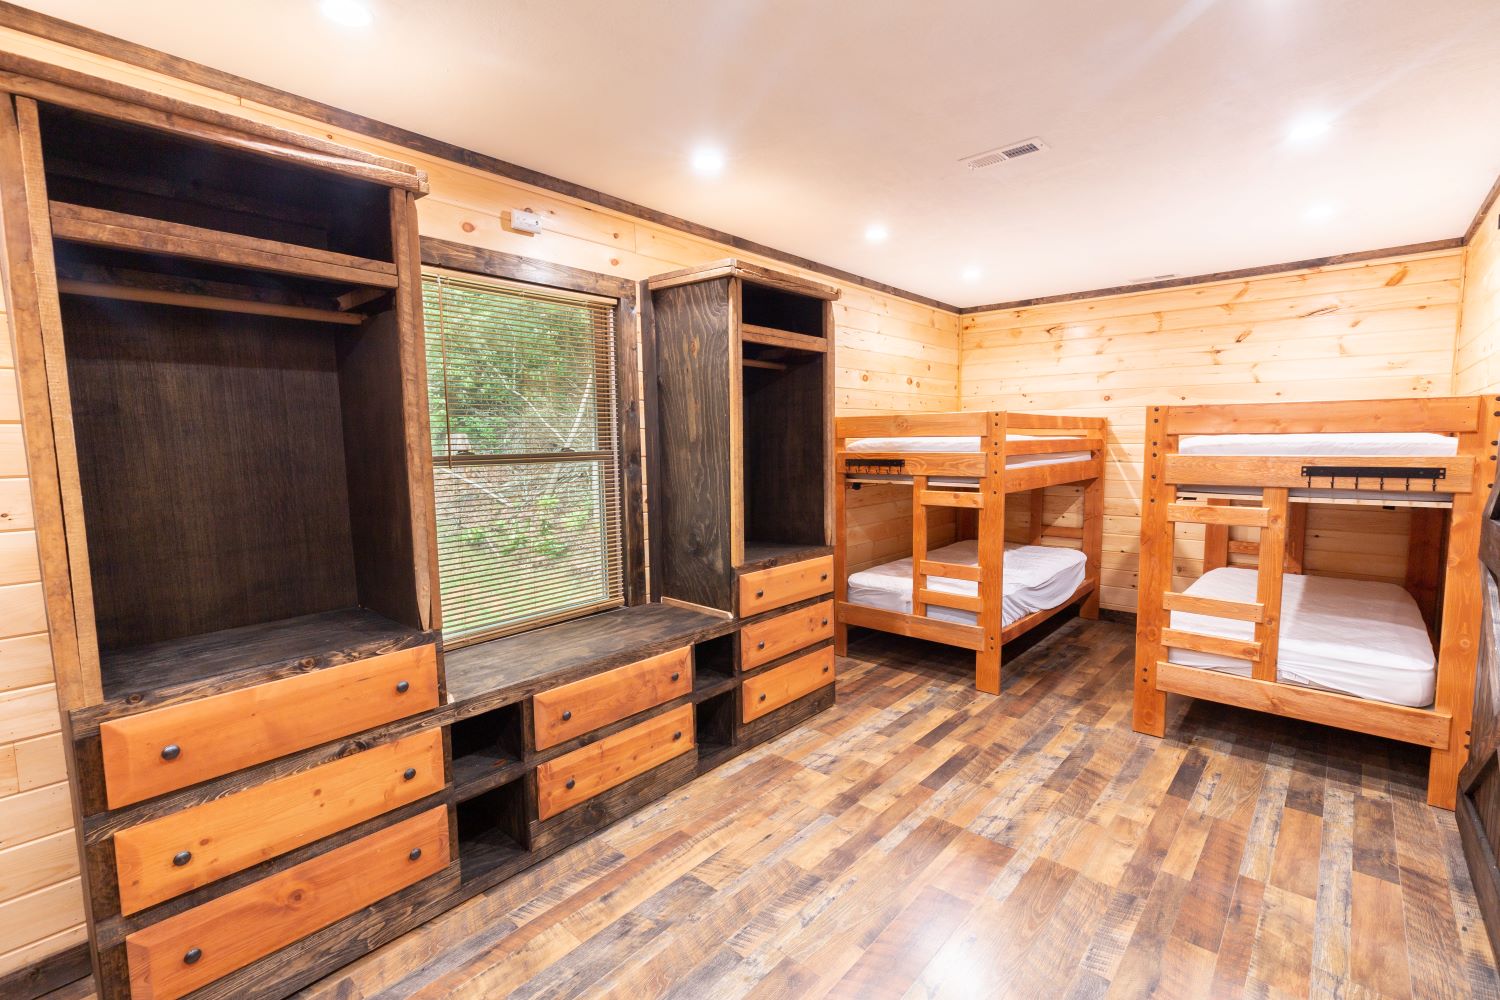 image of bunk beds in room at bunkhouse cabin